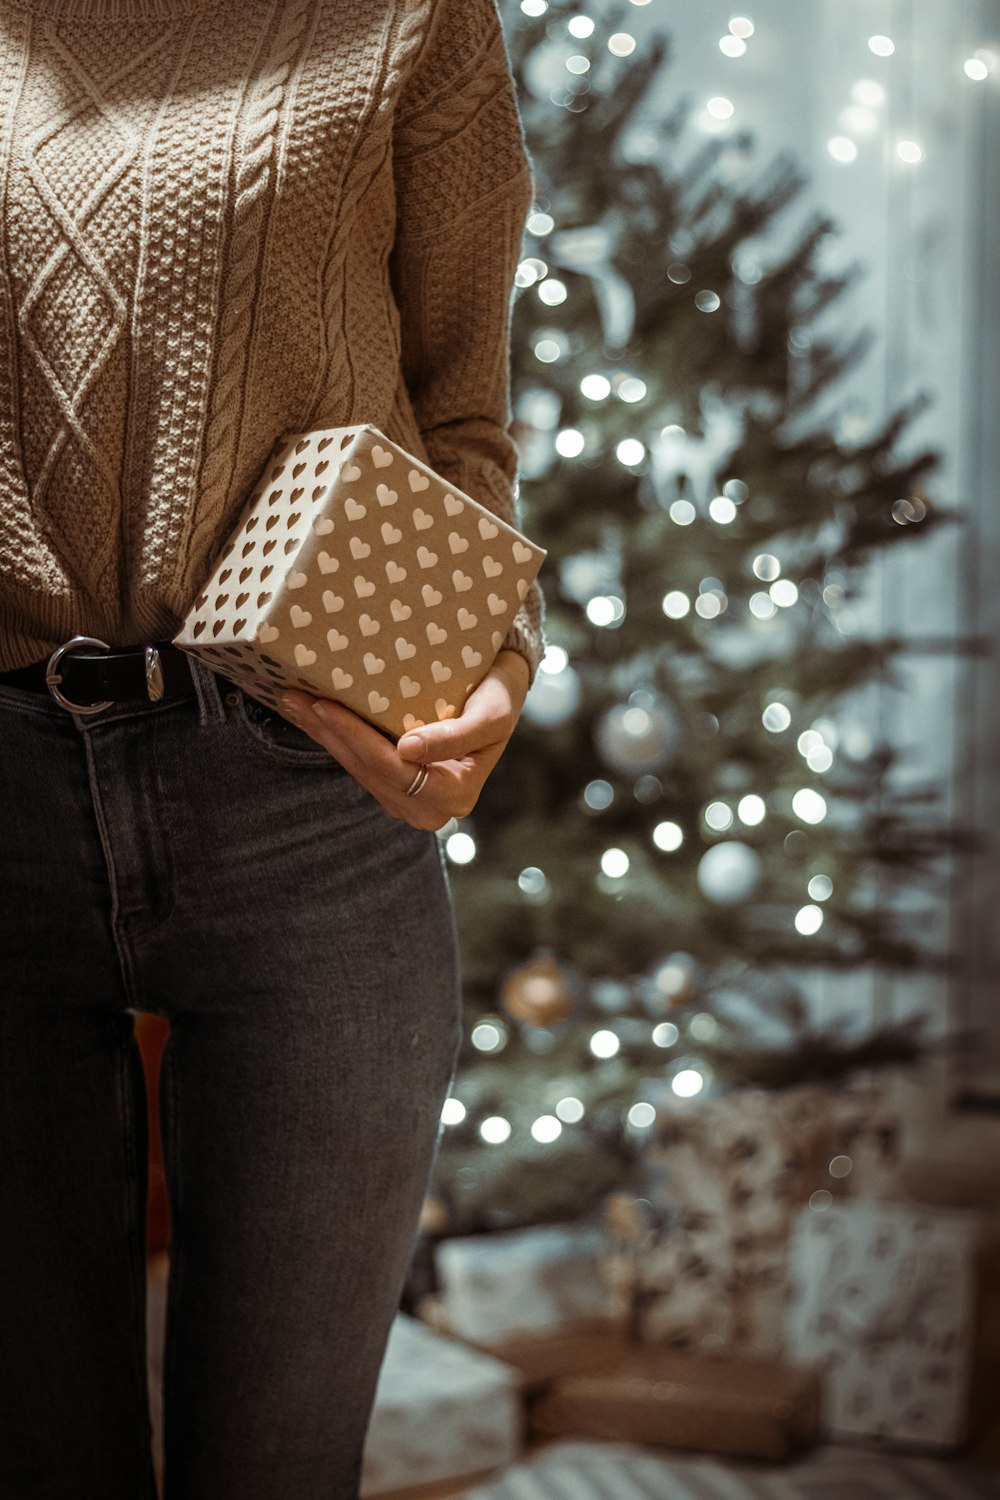 woman in brown sweater holding white and black polka dot box